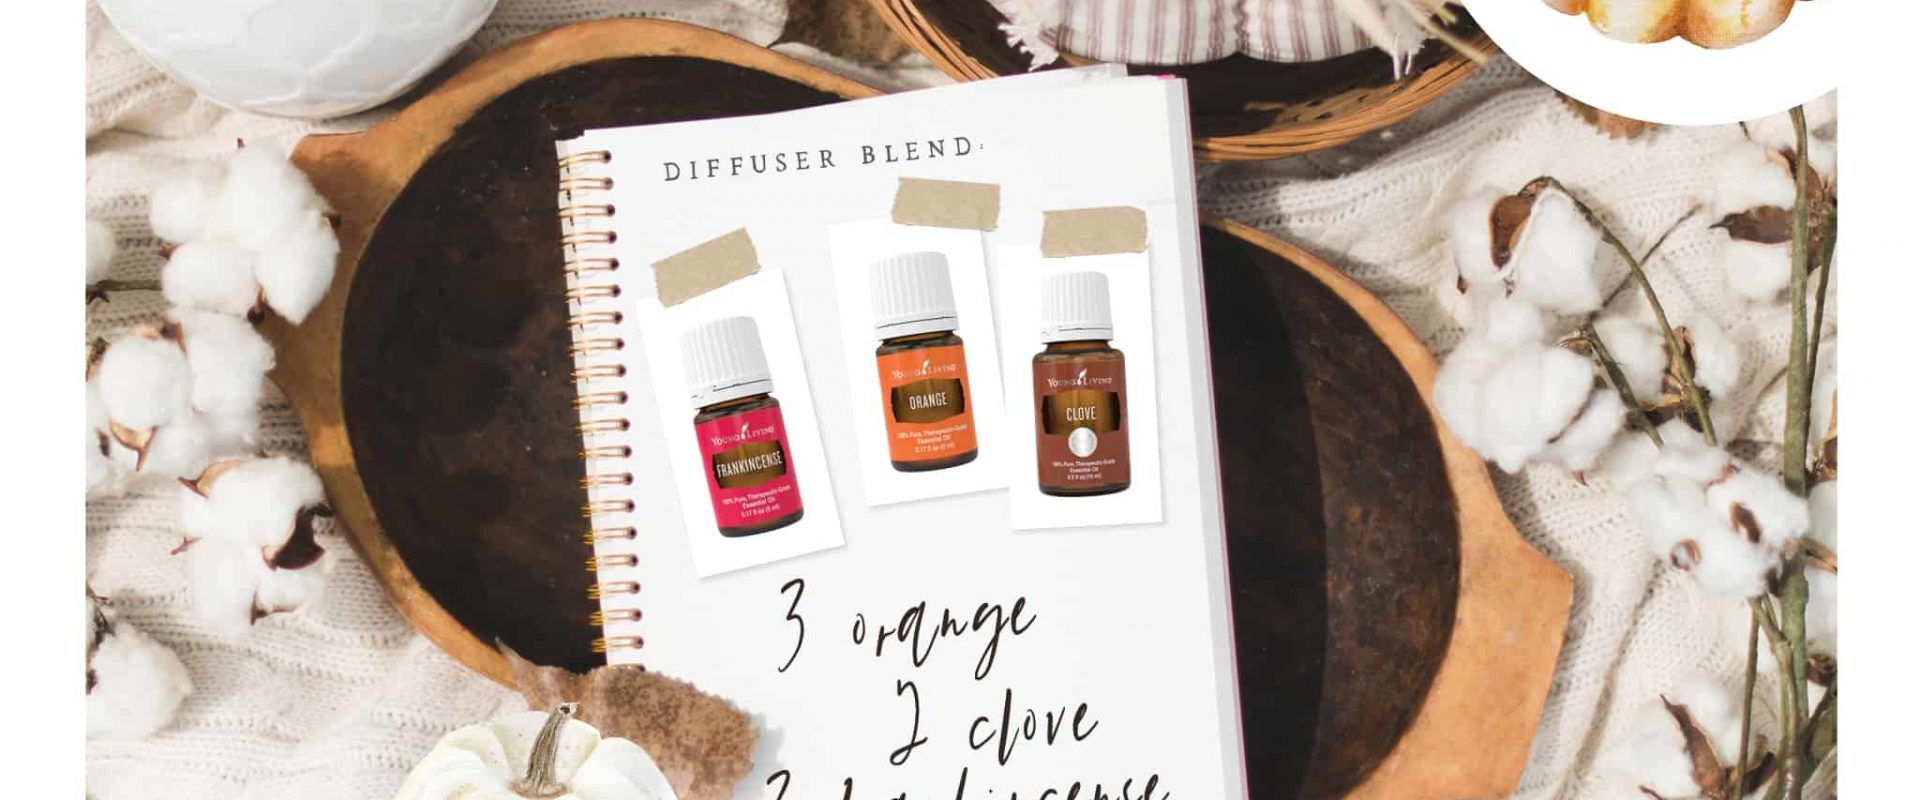 Grab your book! Find your space!  Enjoy this fall diffuser blend